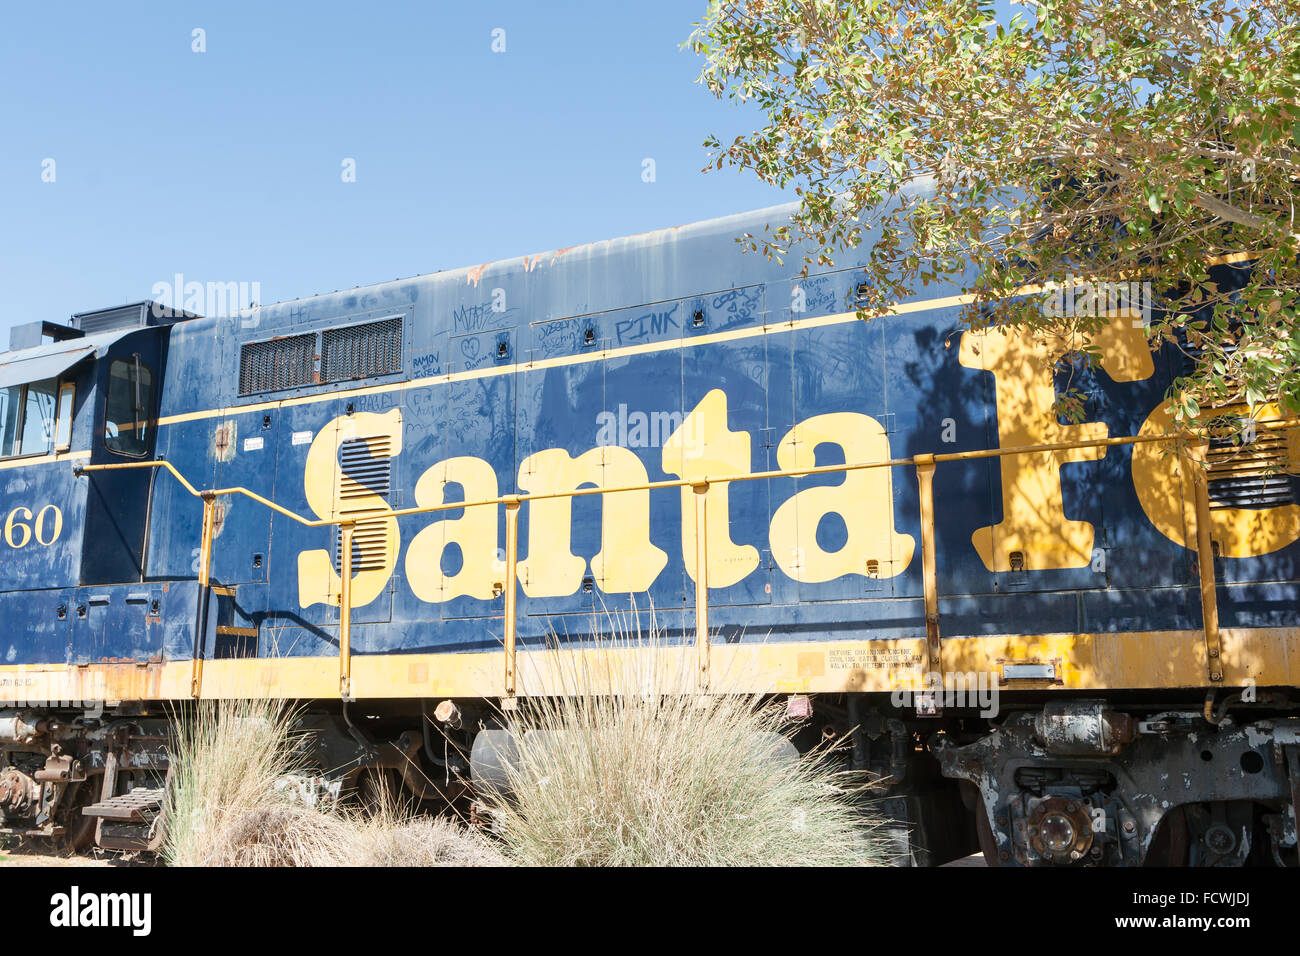 No longer used the old Number 60 Santa Fe train parked up in Barstow California at Amtrack Rail Station which houses Western Ame Stock Photo